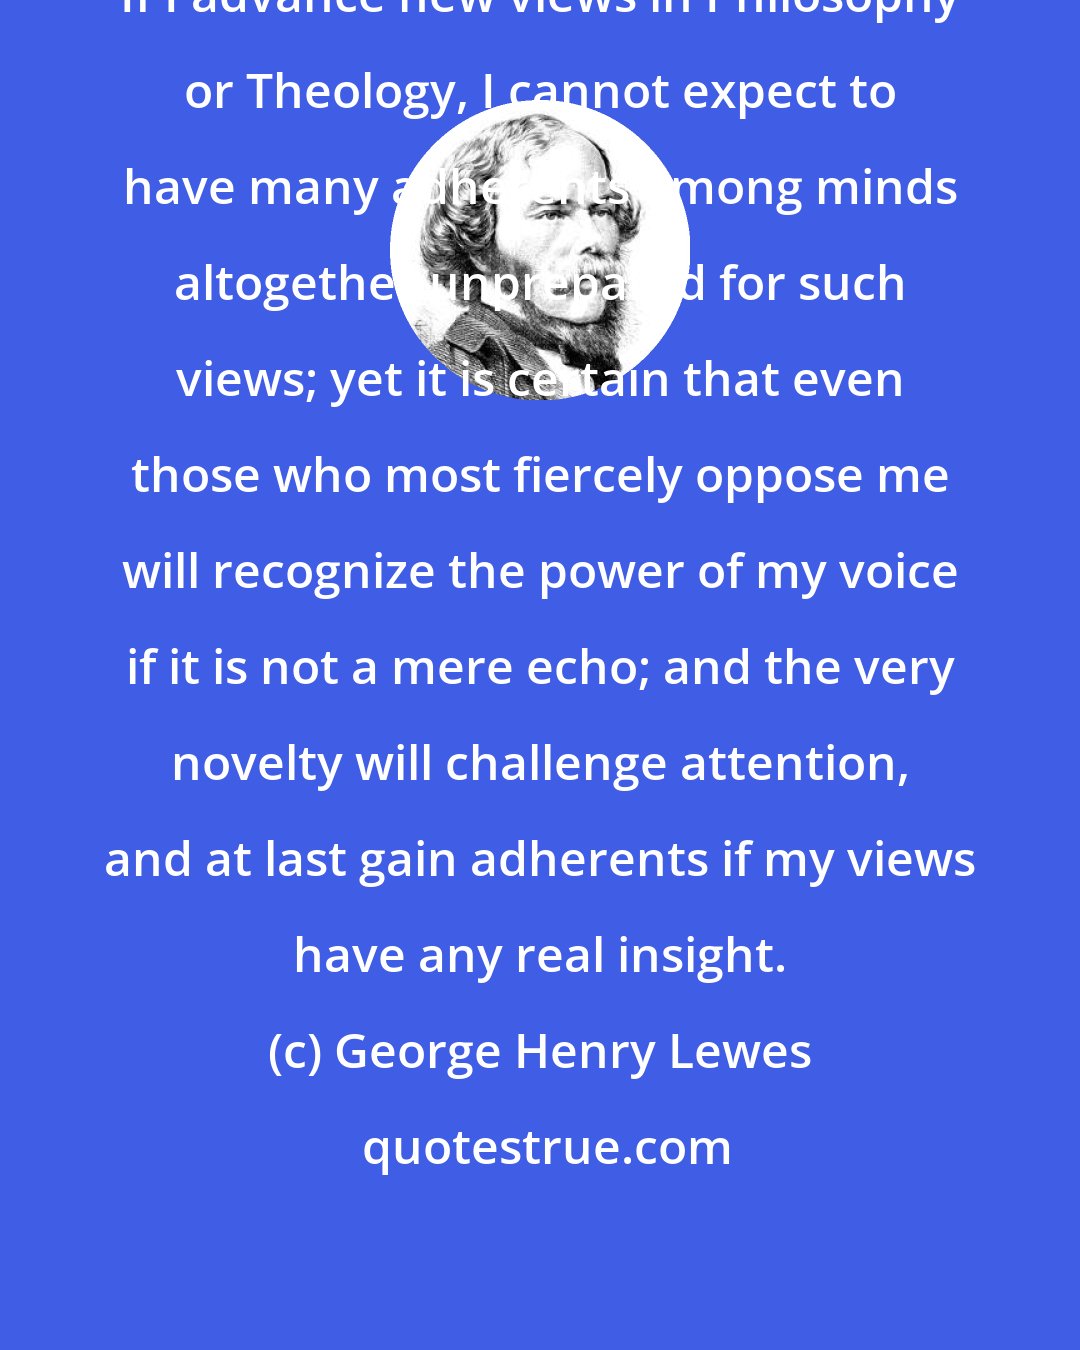 George Henry Lewes: If I advance new views in Philosophy or Theology, I cannot expect to have many adherents among minds altogether unprepared for such views; yet it is certain that even those who most fiercely oppose me will recognize the power of my voice if it is not a mere echo; and the very novelty will challenge attention, and at last gain adherents if my views have any real insight.